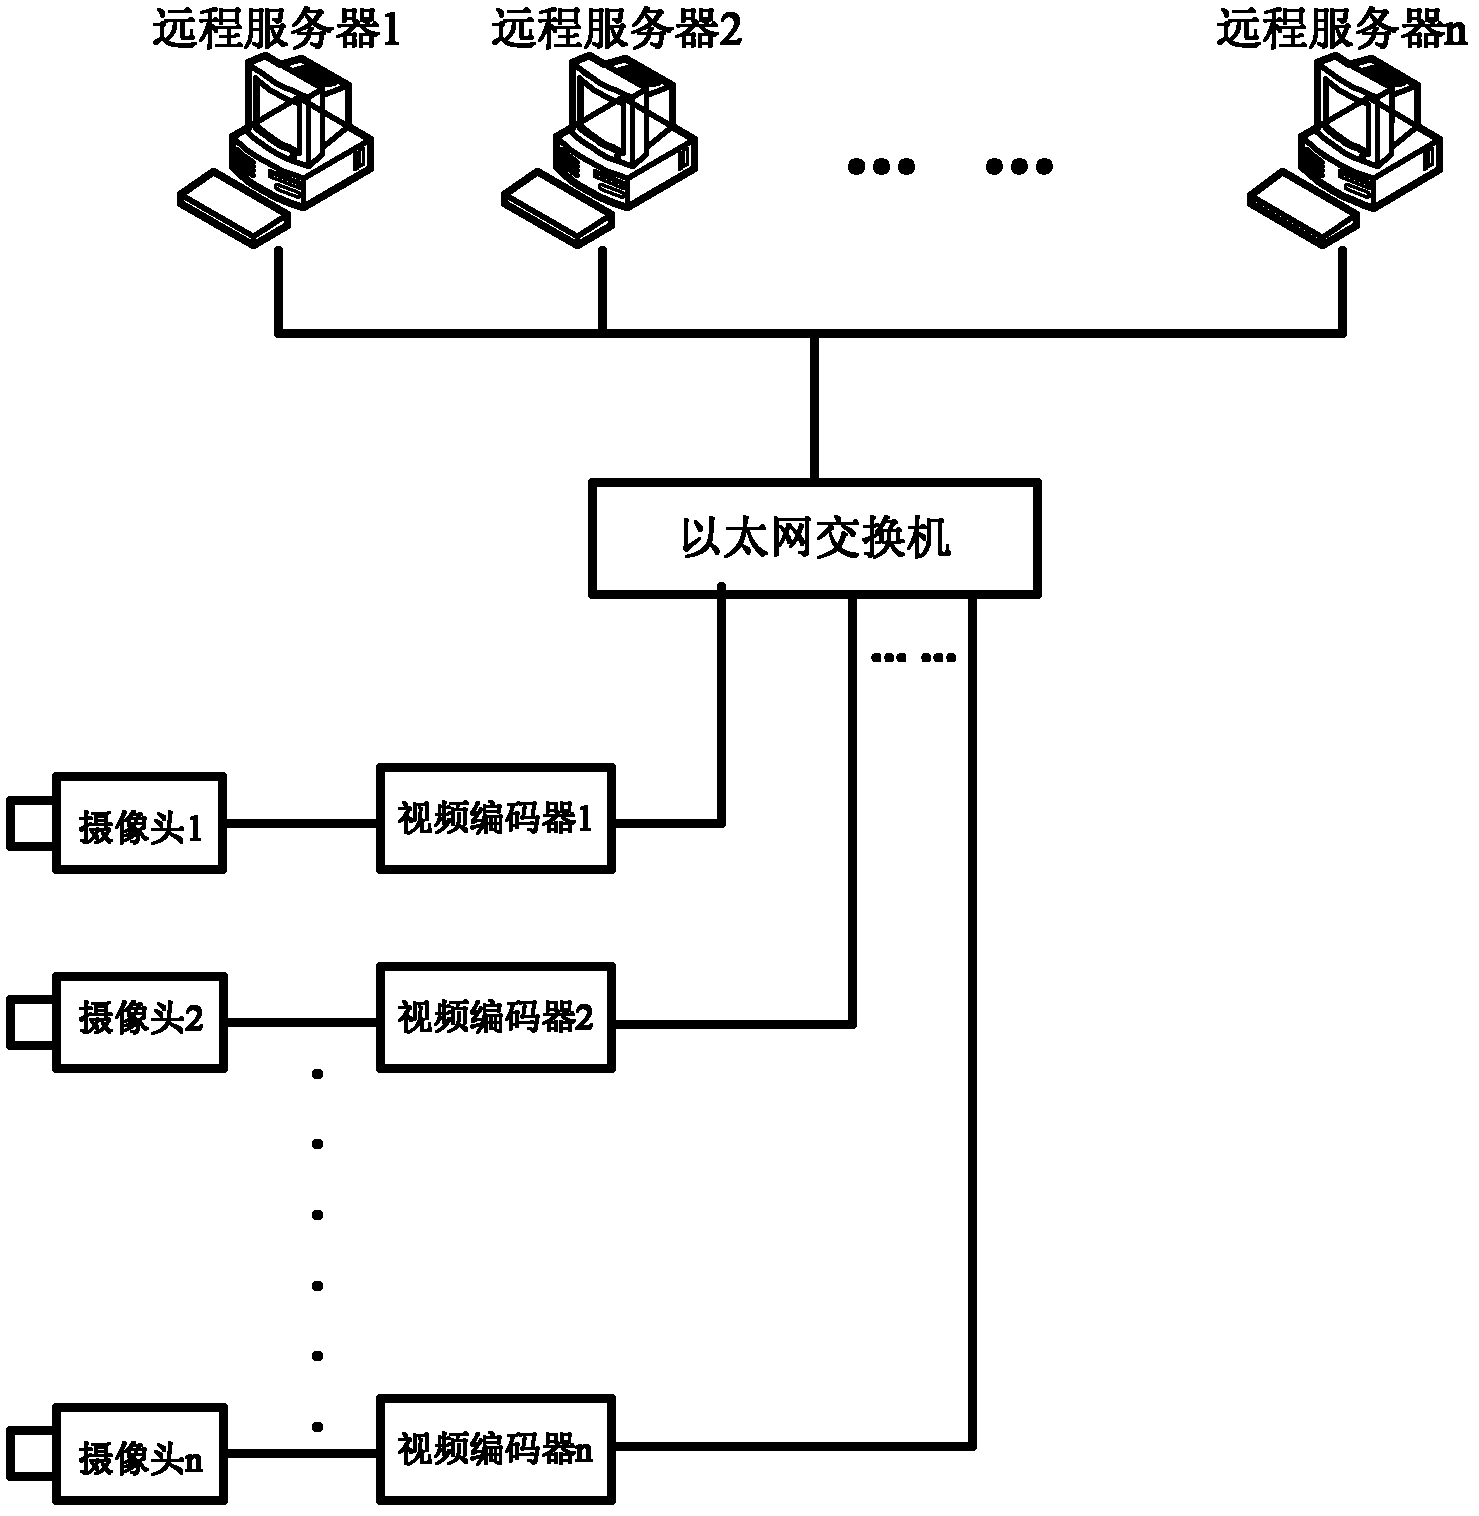 Method and system for managing central air-conditioning end equipment of teaching building based on schedule